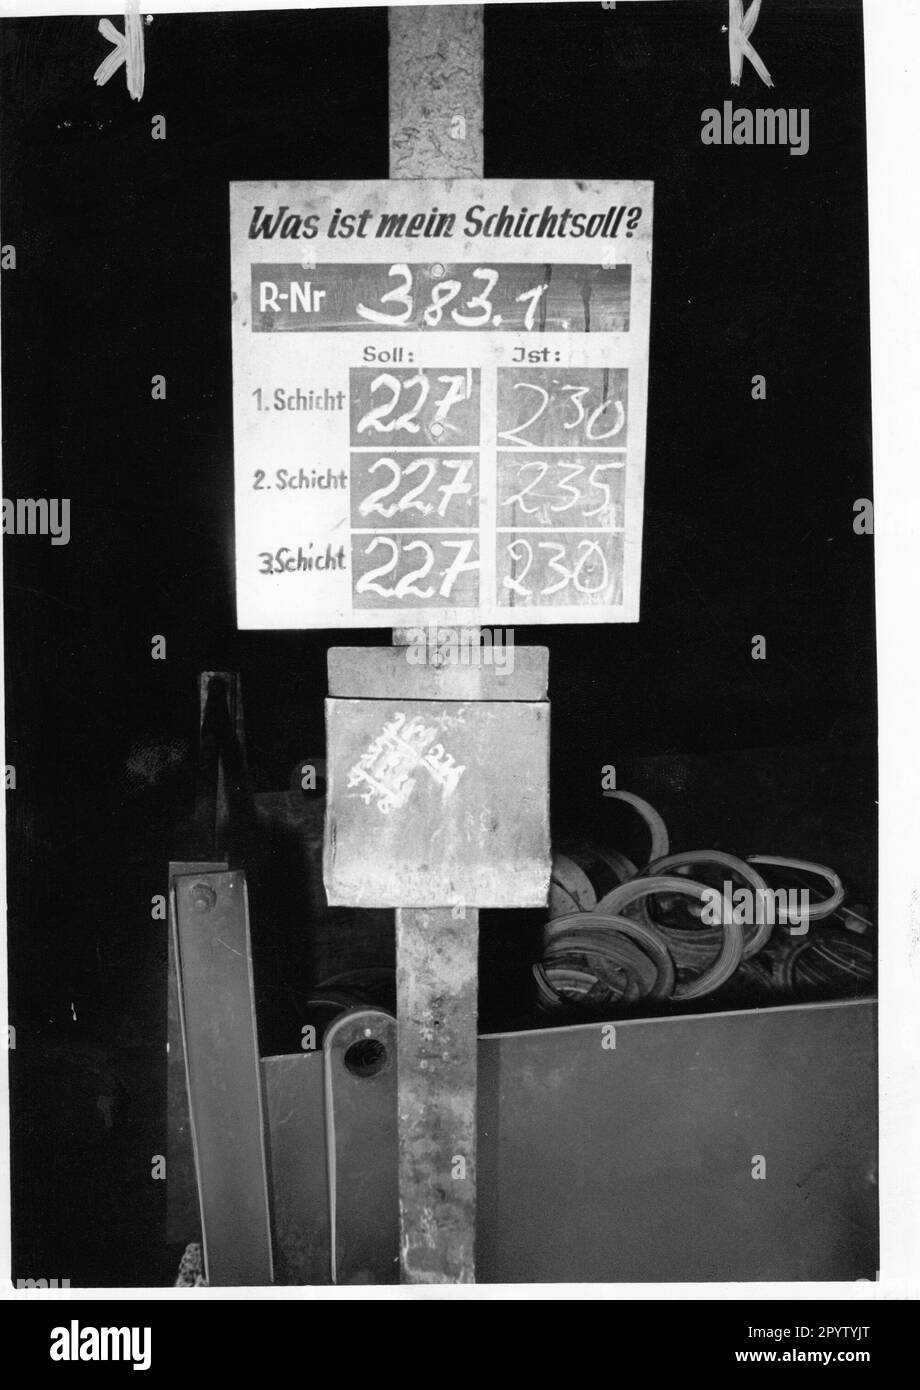 Such a board, attached to each machine, provides information about the achievements at the IFA Autowerk Ludwigsfelde.LKW W50.DDR- Betriebe. Photo: MAZ/Dieter Lange,25.01.1980 [automated translation] Stock Photo